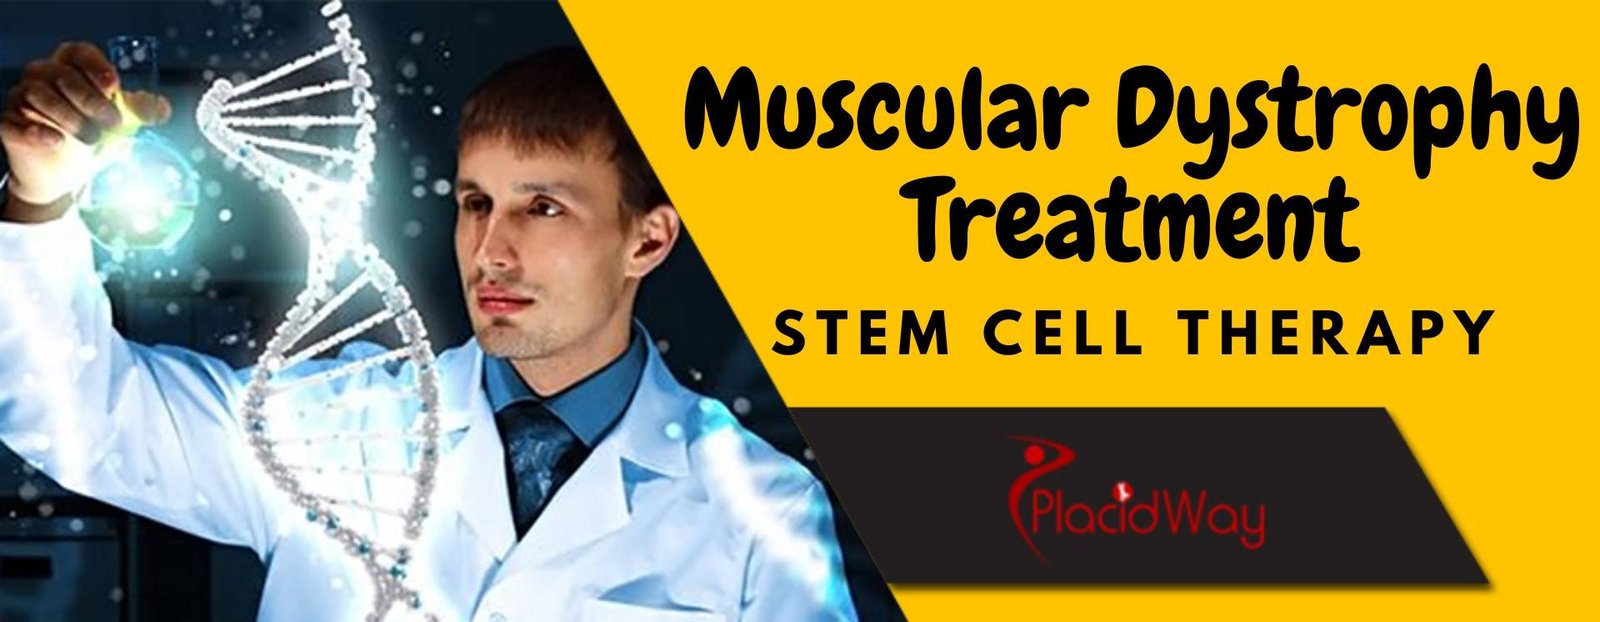 Muscular Dystrophy Stem Cell Treatment